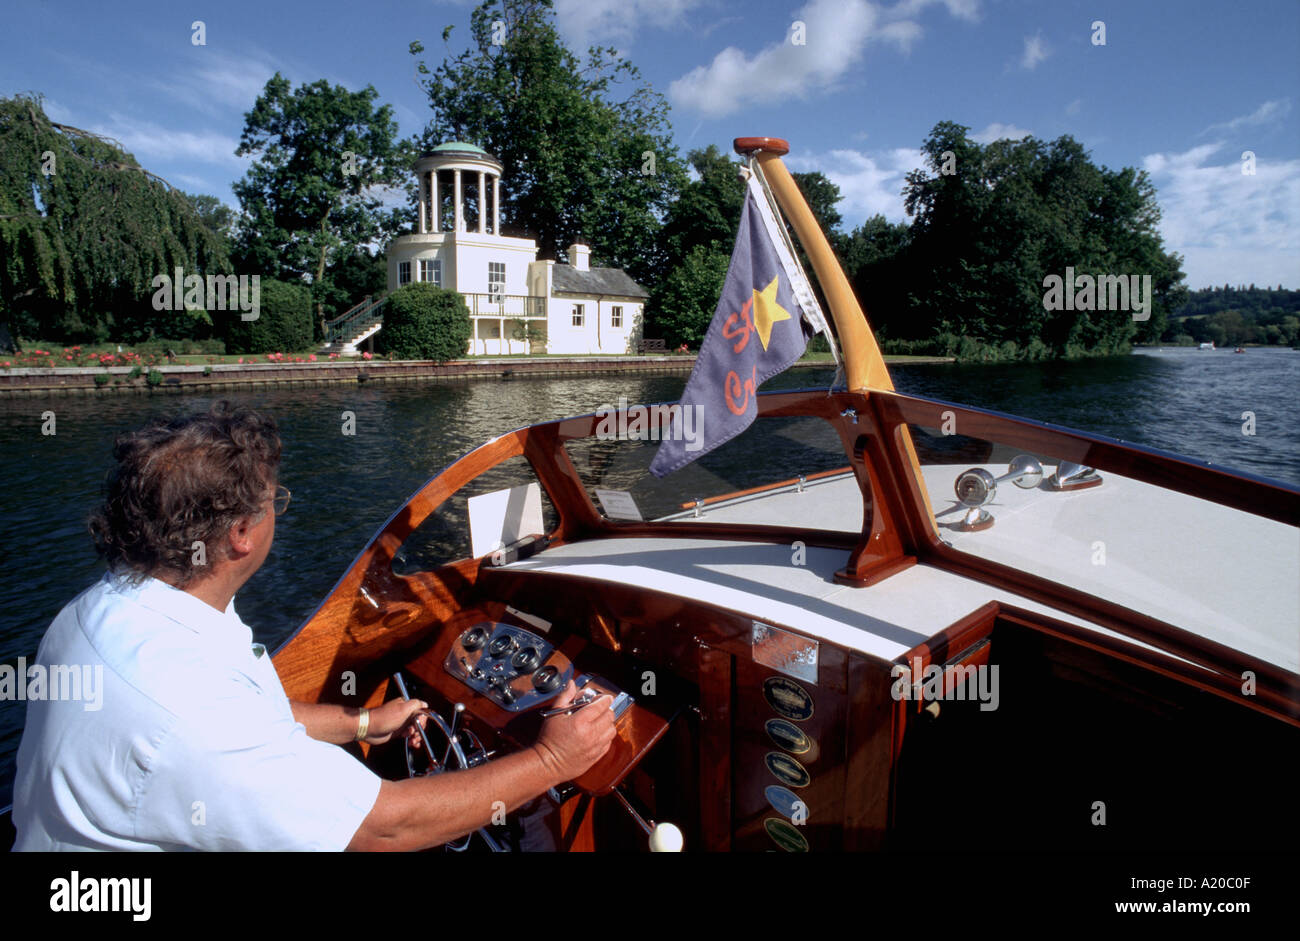 A Bates Star Craft motor cruiser on the River Thames at Henley on Thames Oxfordshire England UK Stock Photo